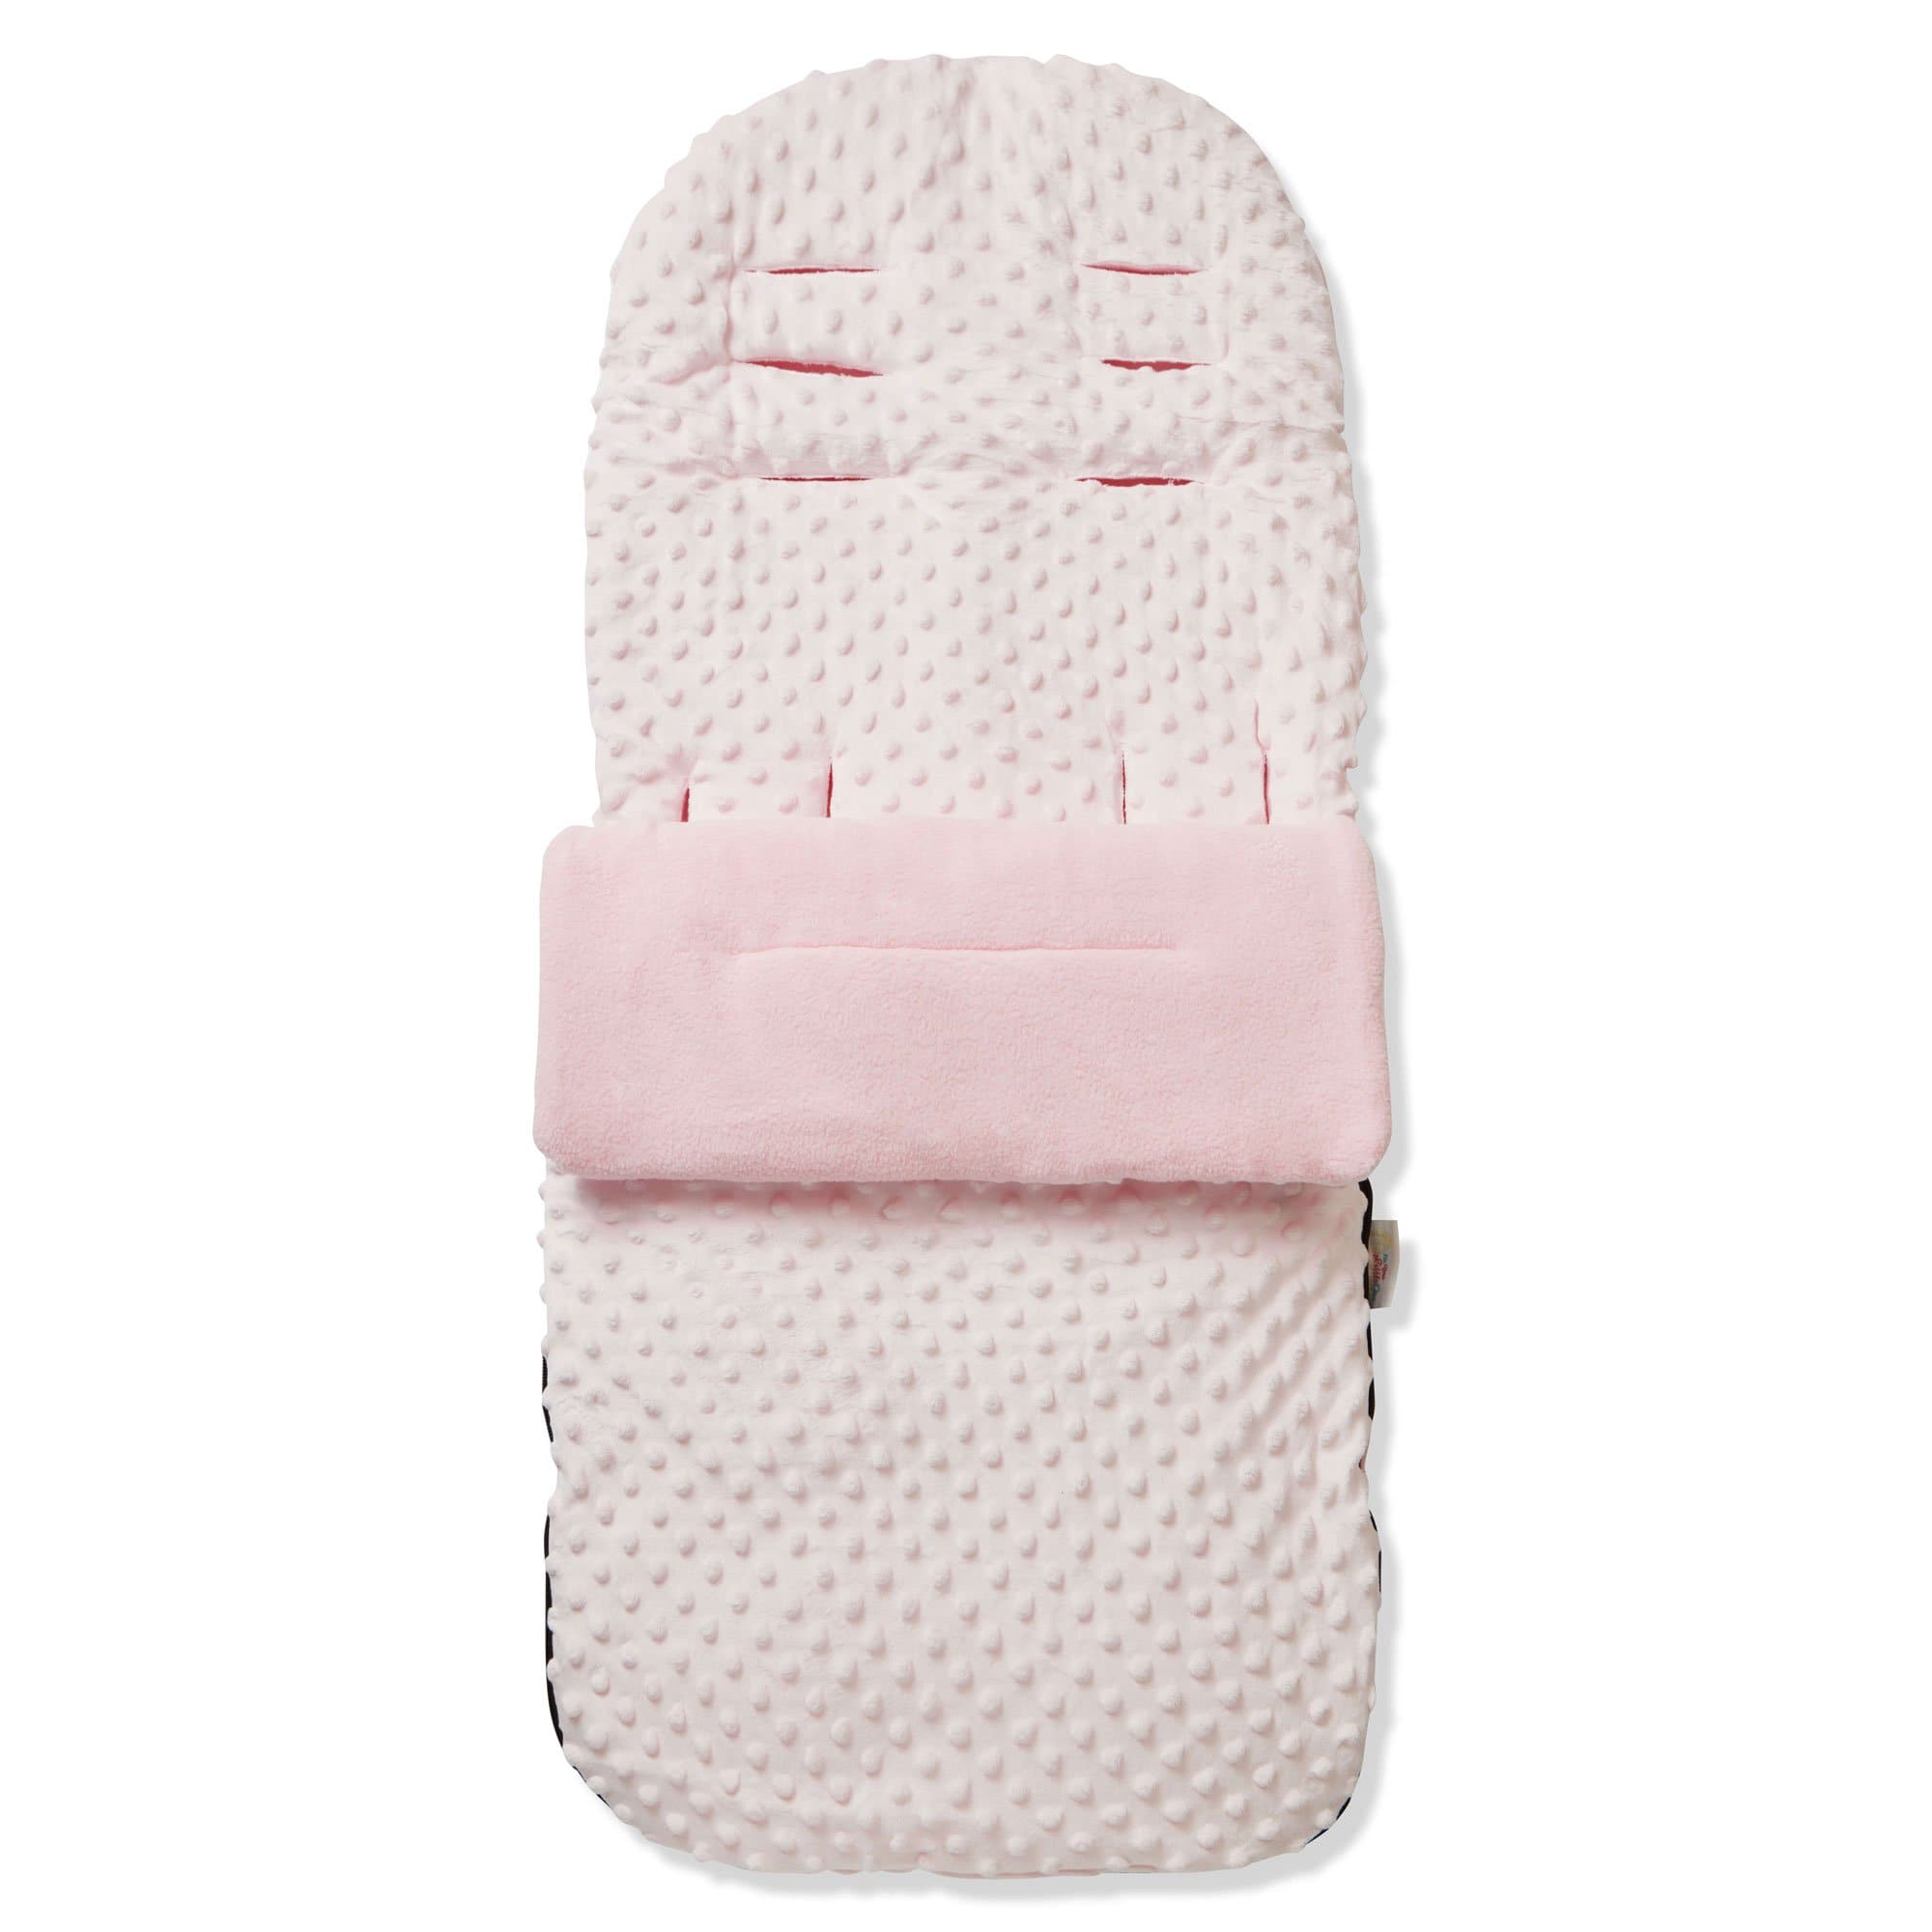 Dimple Footmuff / Cosy Toes Compatible with Brio - Pink / Fits All Models | For Your Little One